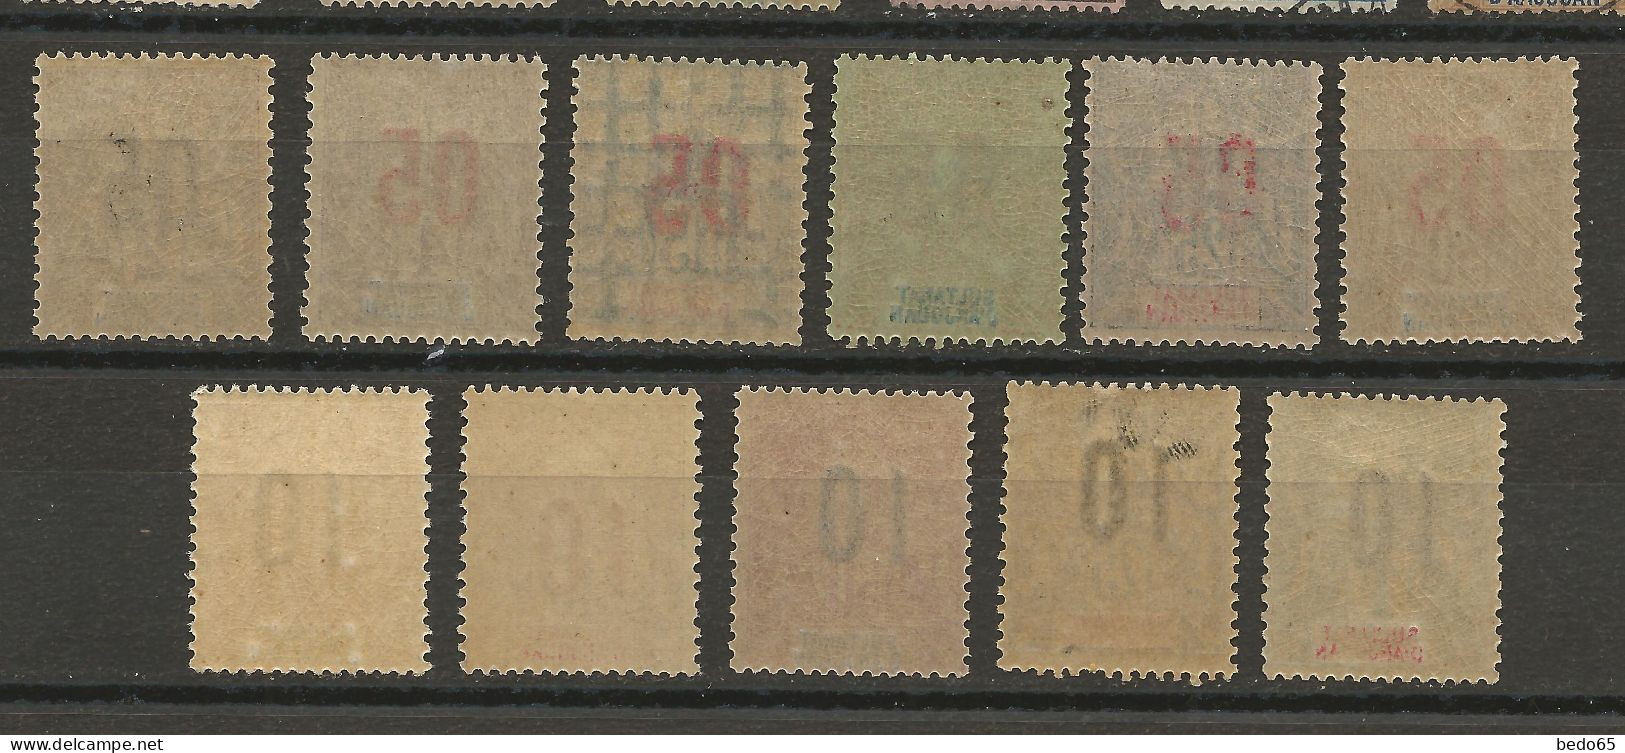 ANJOUAN N° 20 à 30 NEUF** LUXE SANS CHARNIERE / Hingeless / MNH - Unused Stamps